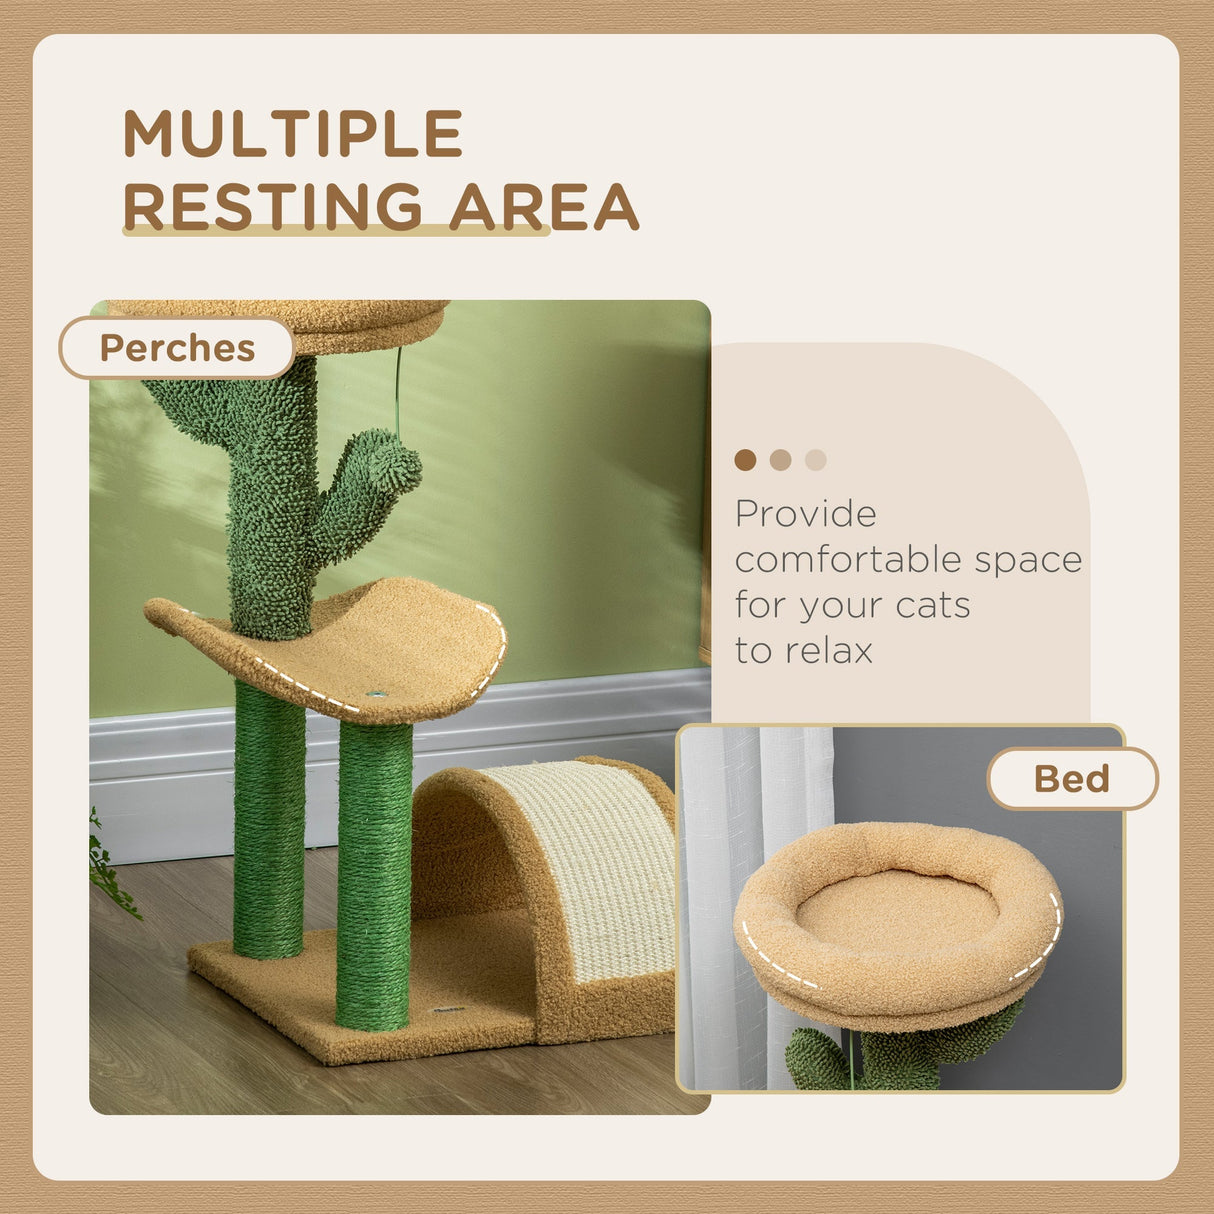 72cm Cat Tree, Kitty Activity Center, Wooden Cat Climbing Toy, Cat Tower with Bed Ball Toy Sisal Scratching Post Curved Pad, Yellow, PawHut,